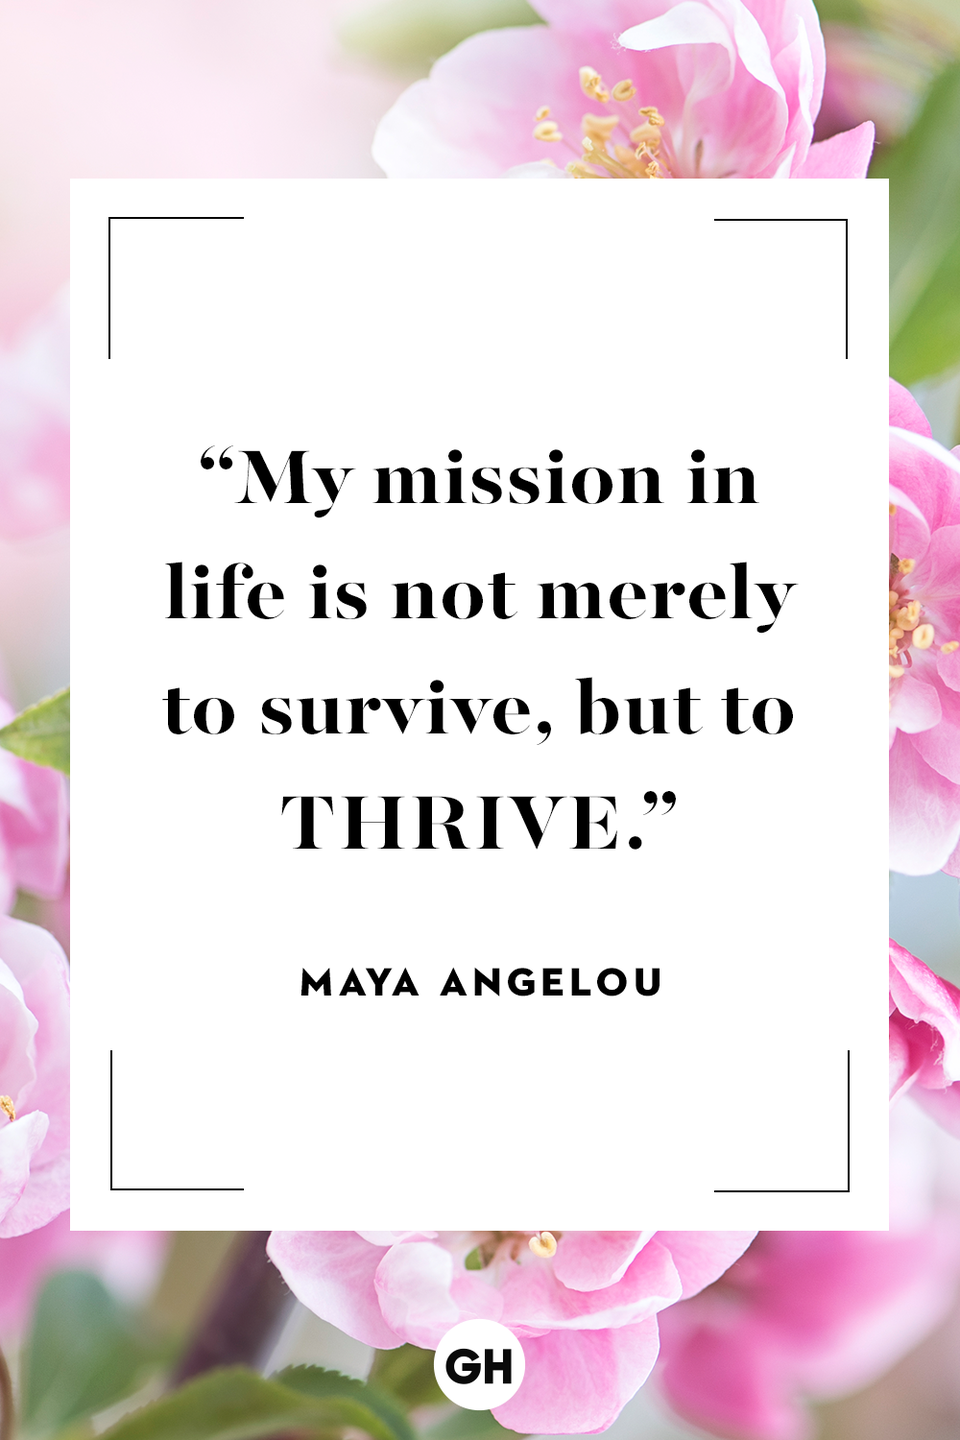 <p>My mission in life is not merely to survive, but to thrive.</p>